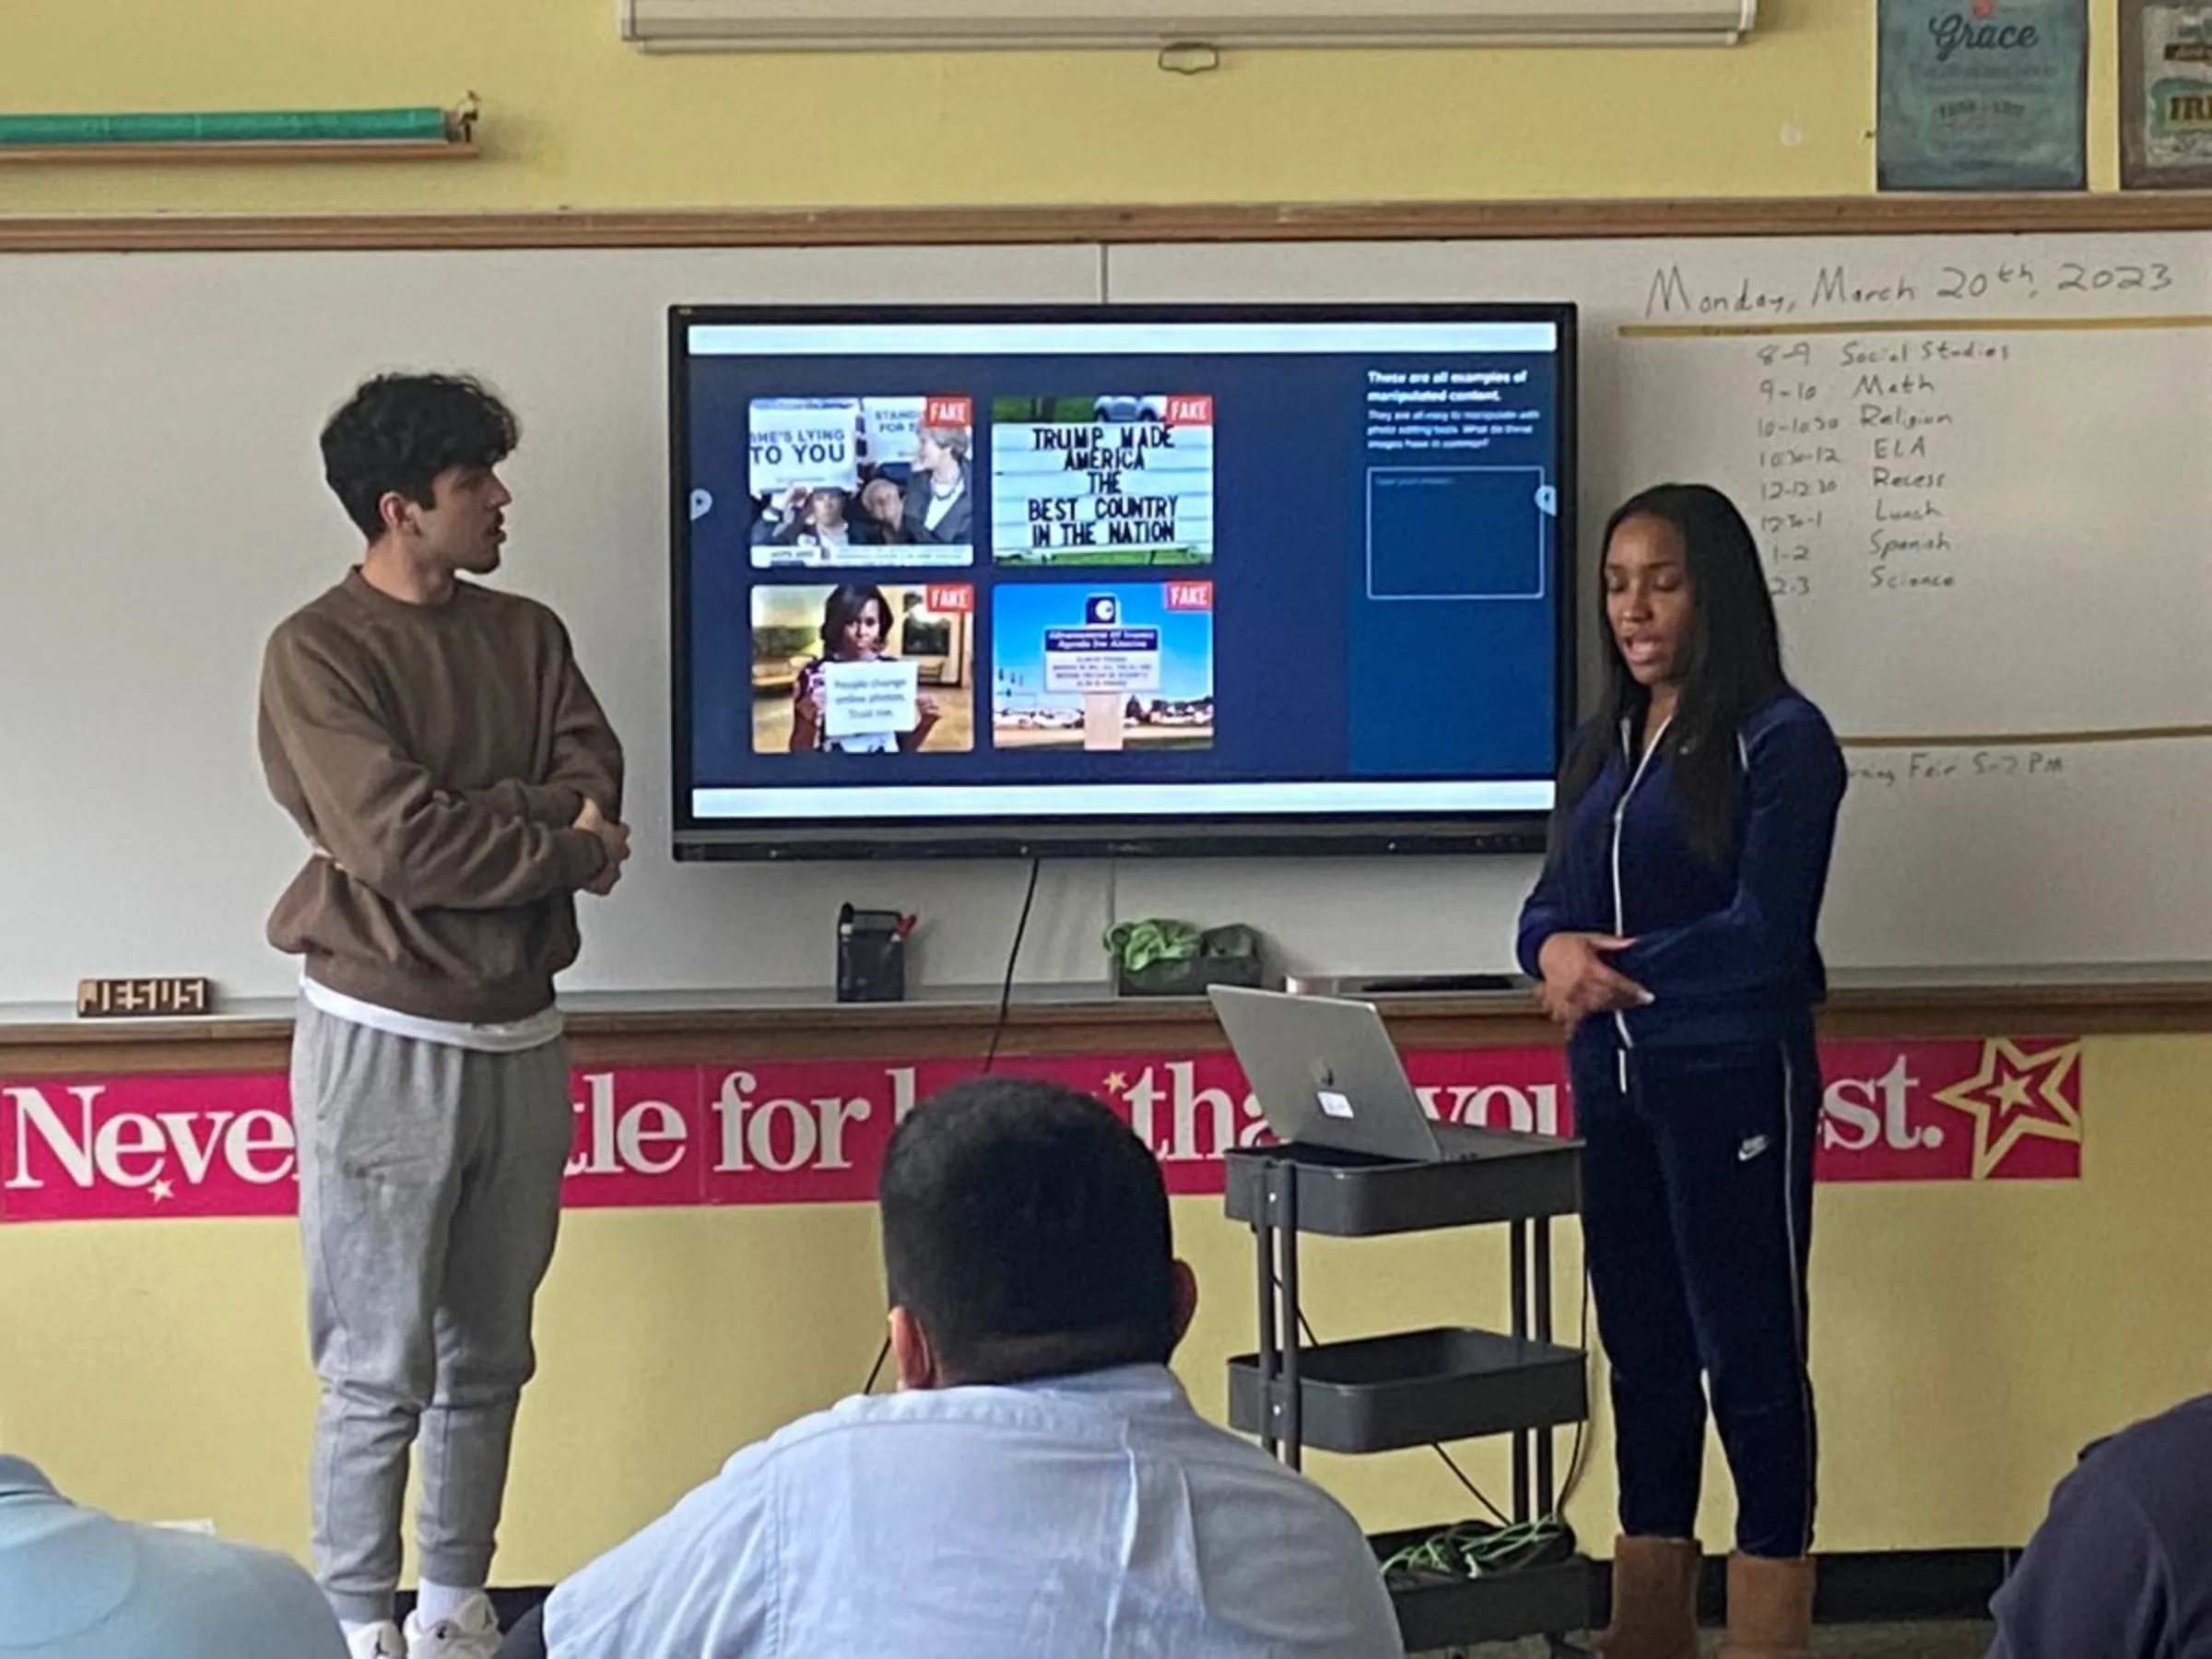 Students in Chicago take part in a media literacy class in March 2023